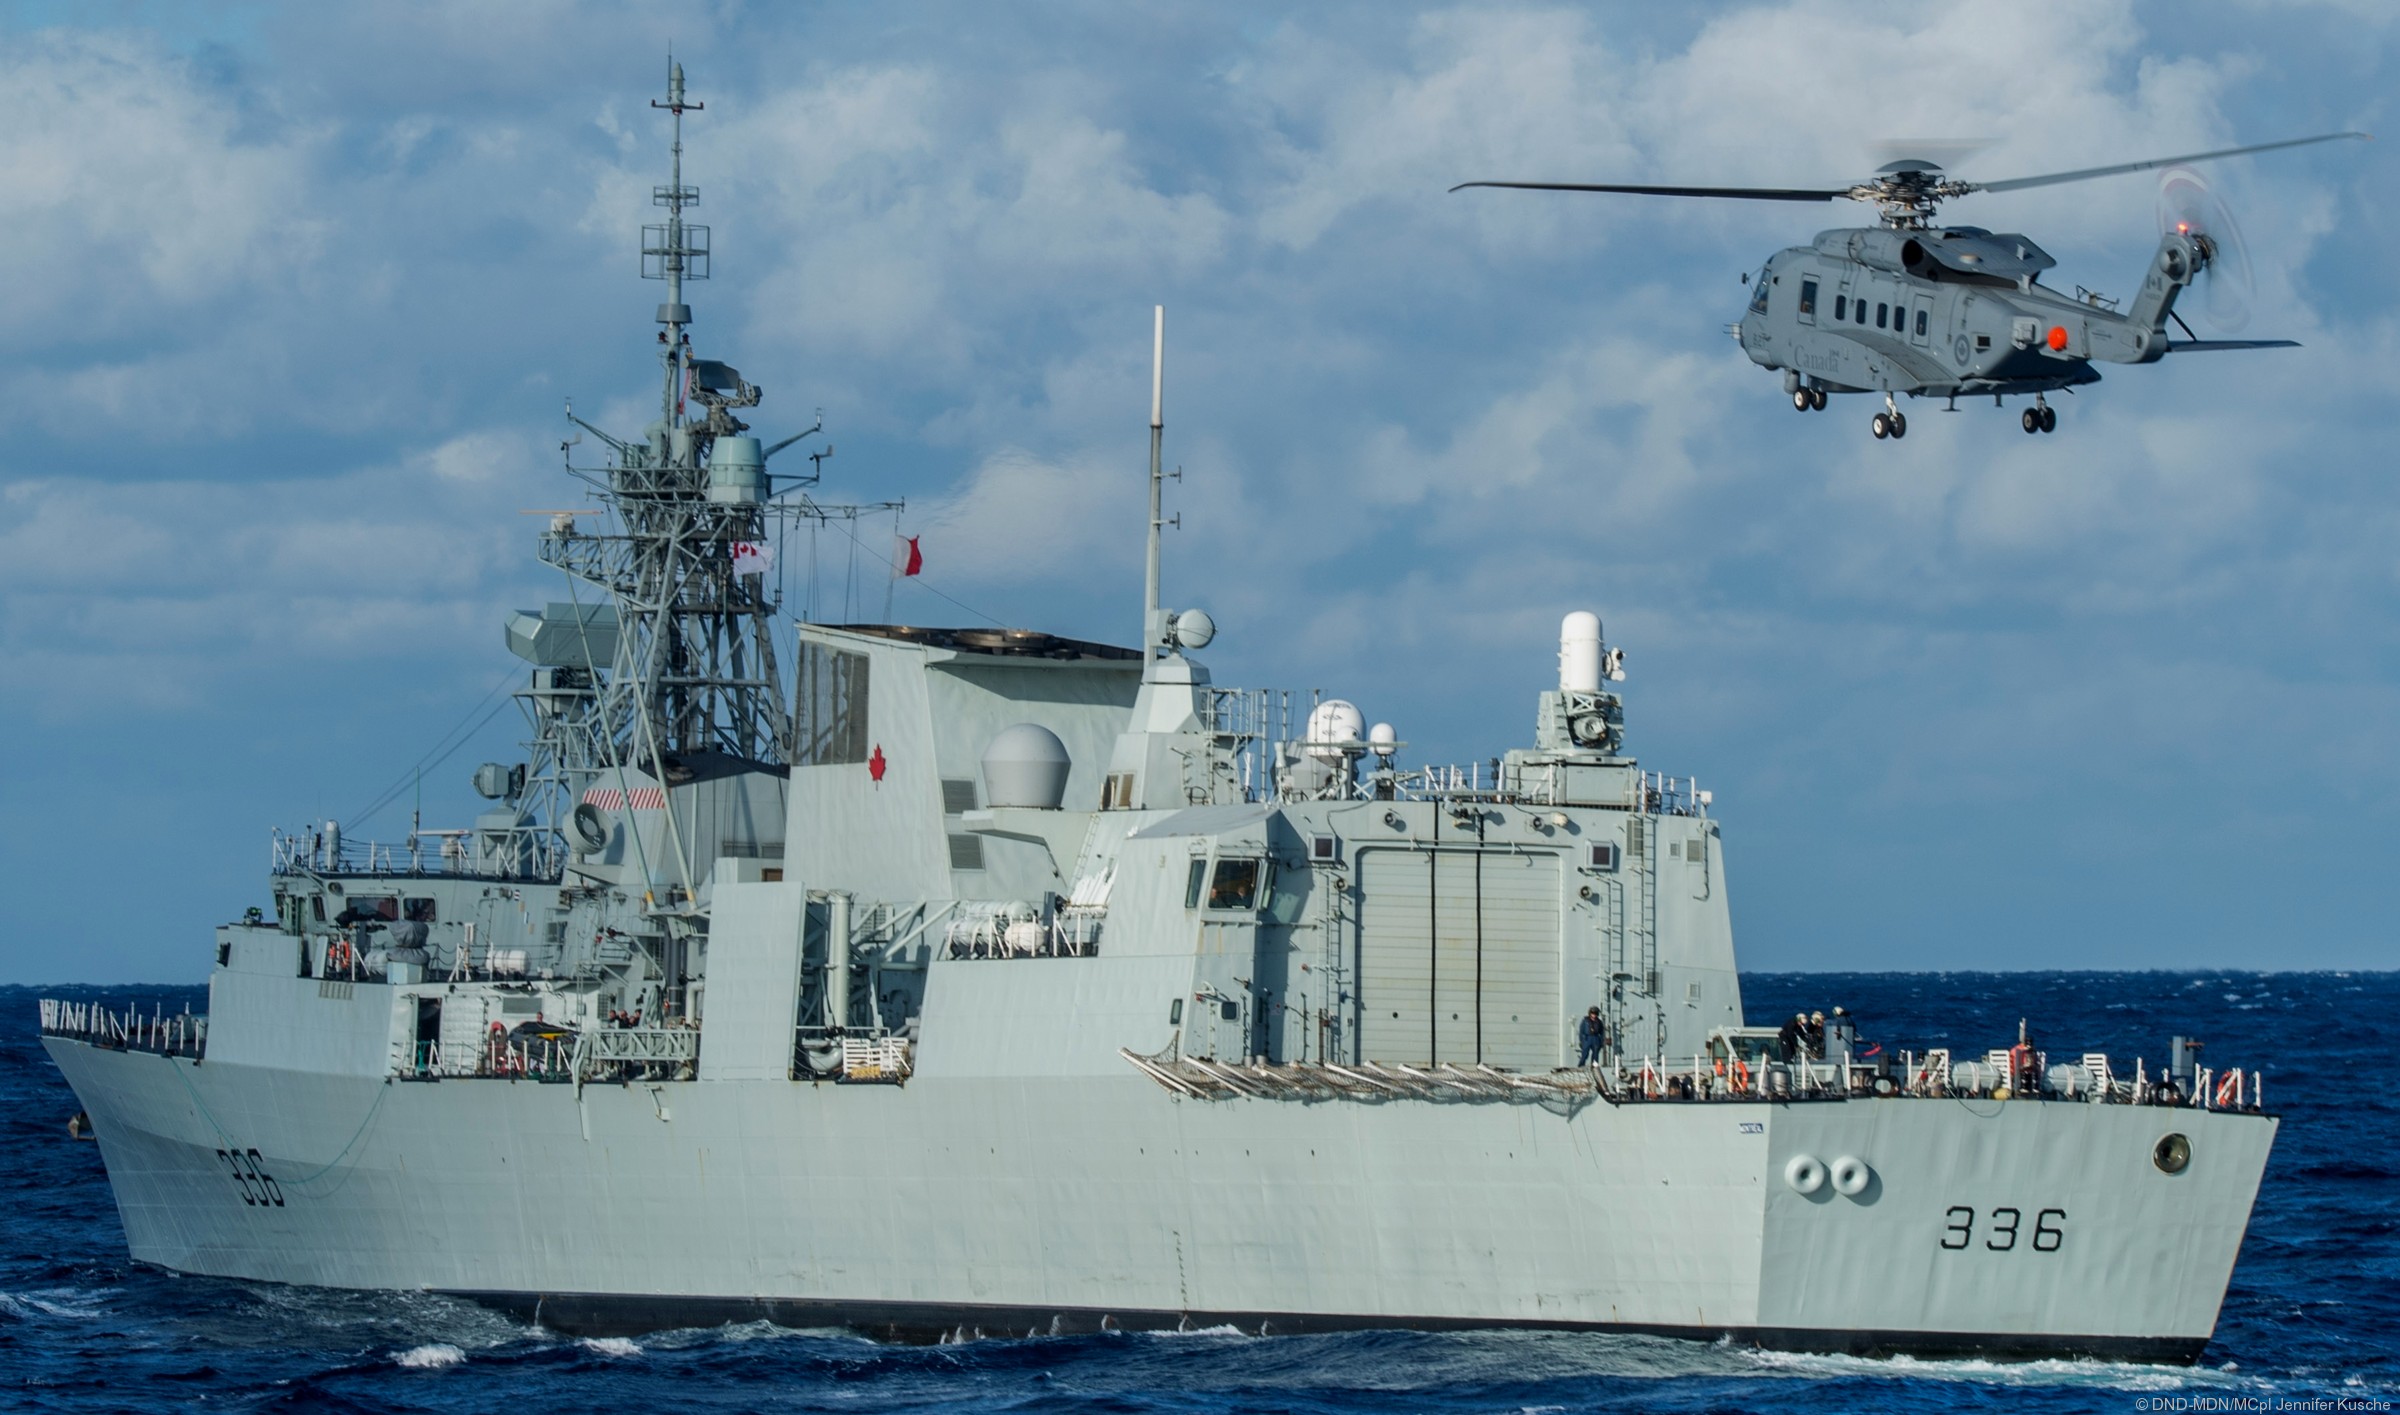 ffh-336 hmcs montreal halifax class helicopter patrol frigate ncsm royal canadian navy 07 ch-148 cyclone